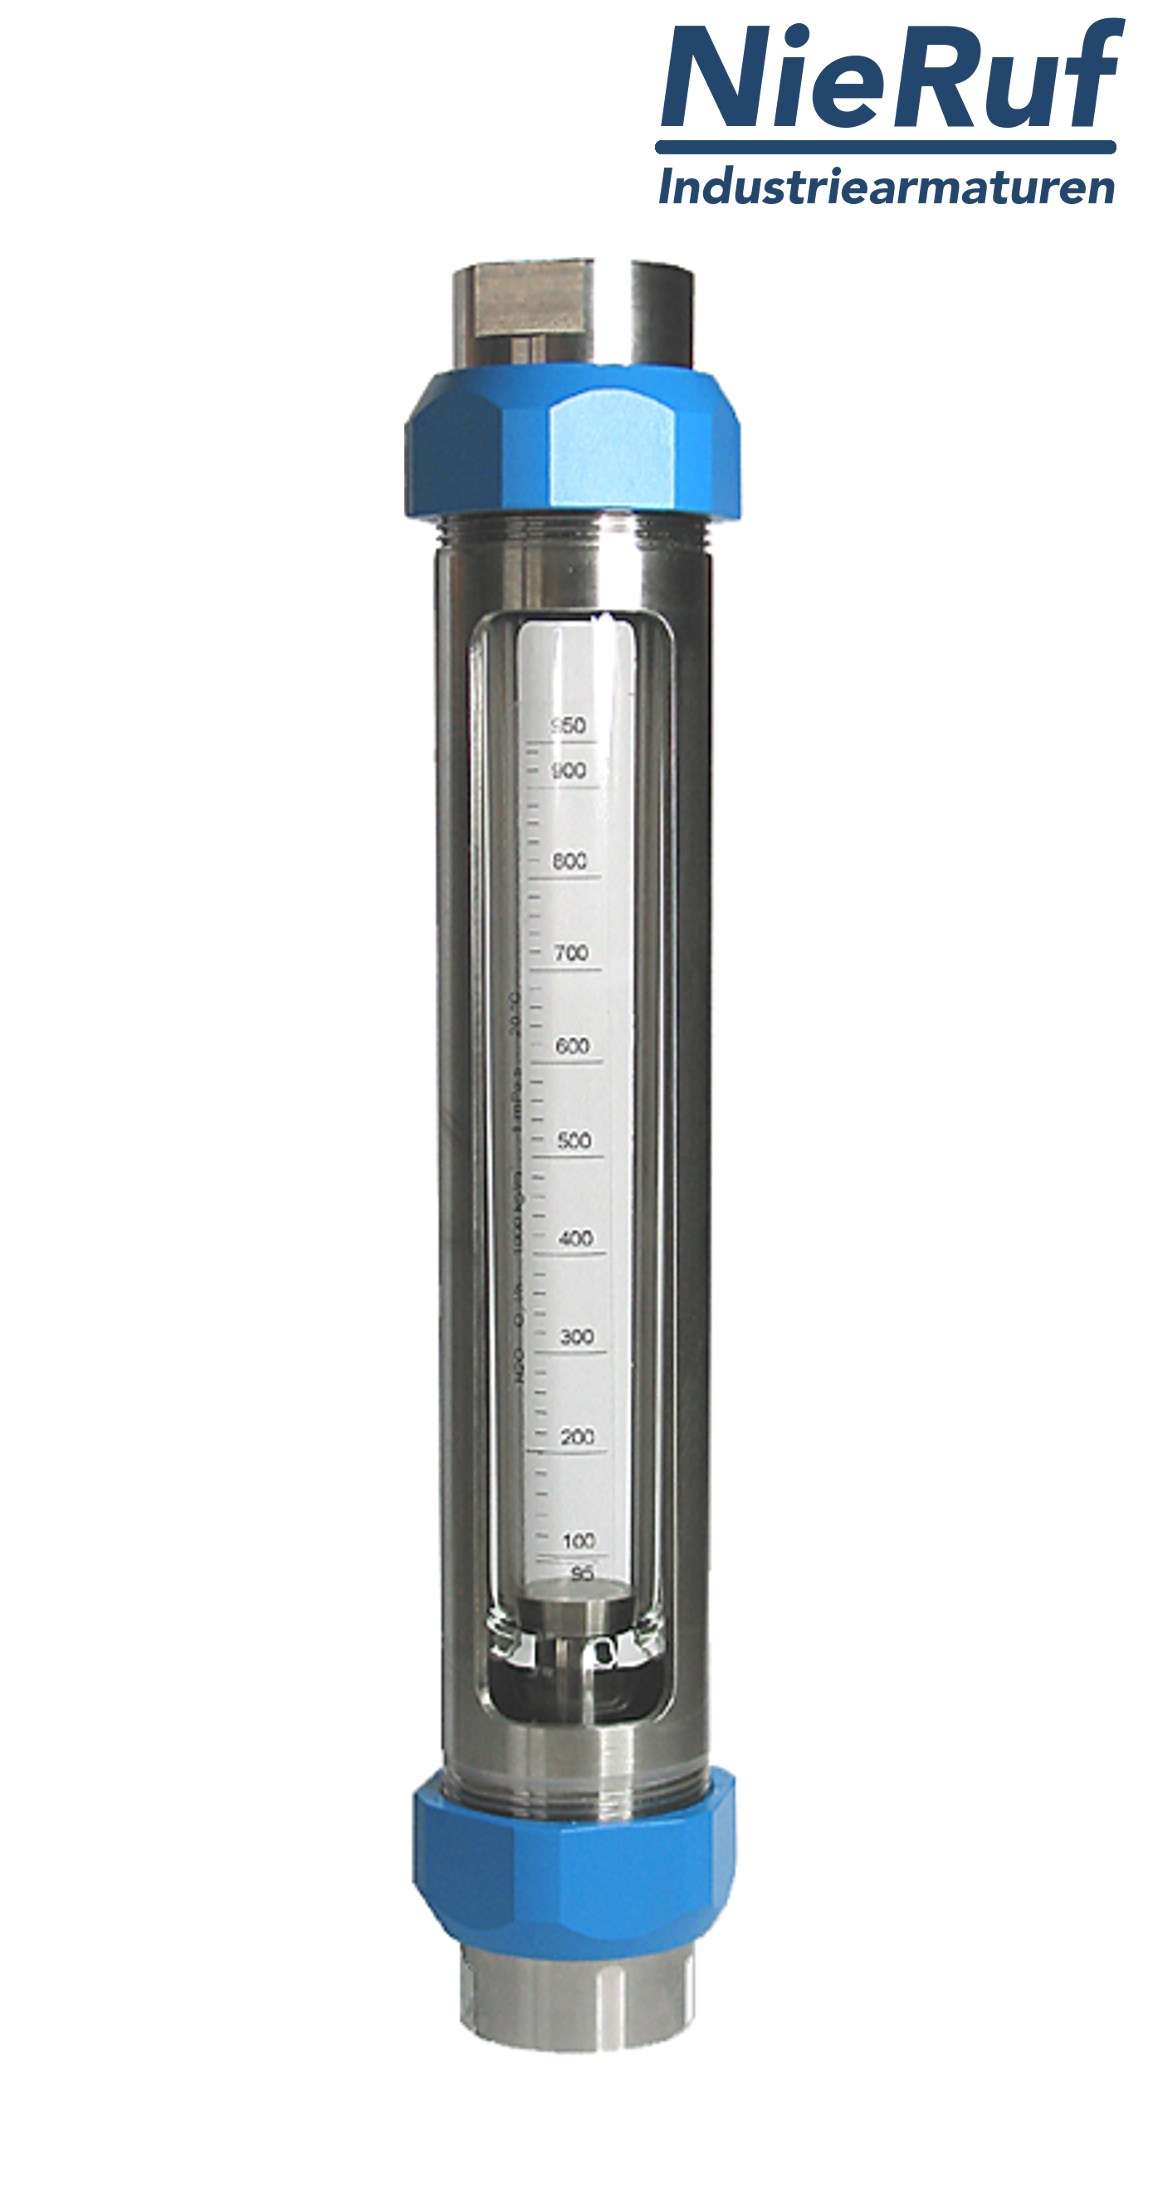 Variable area flowmeter stainless steel + borosilicate 1/2" inch 30.0 - 300.0 l/h air EPDM